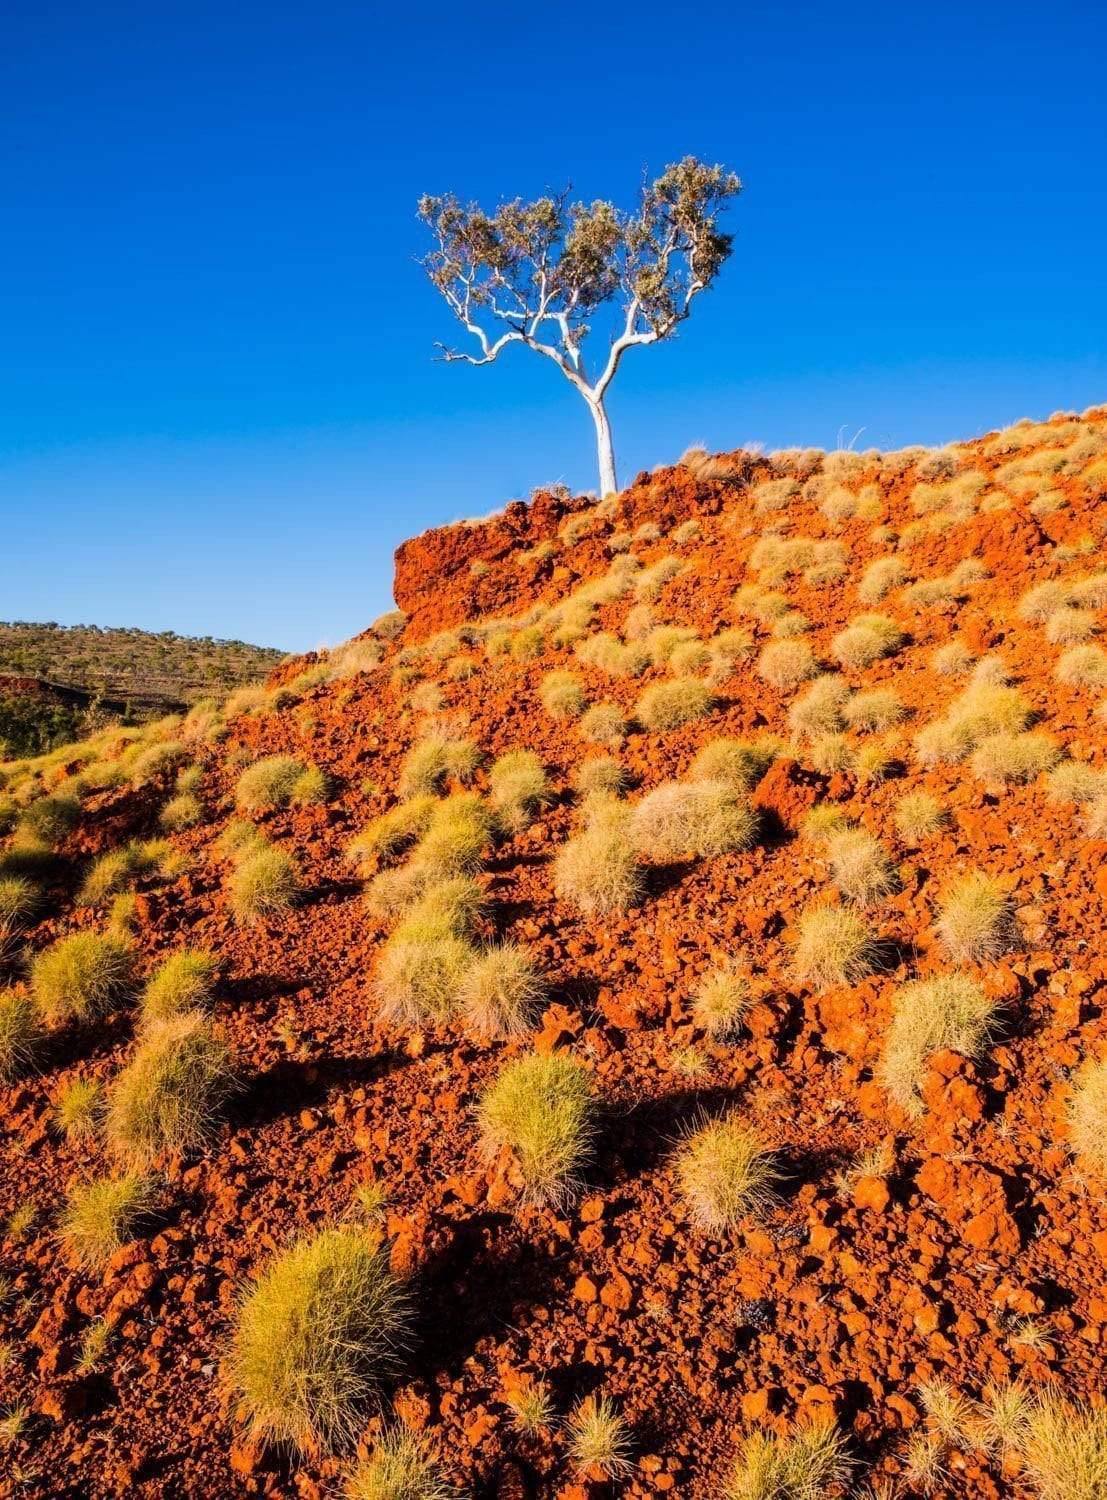 Orangish mountain with some bushes, plants, and a tree on the top, Spinifex - Karijini, The Pilbara